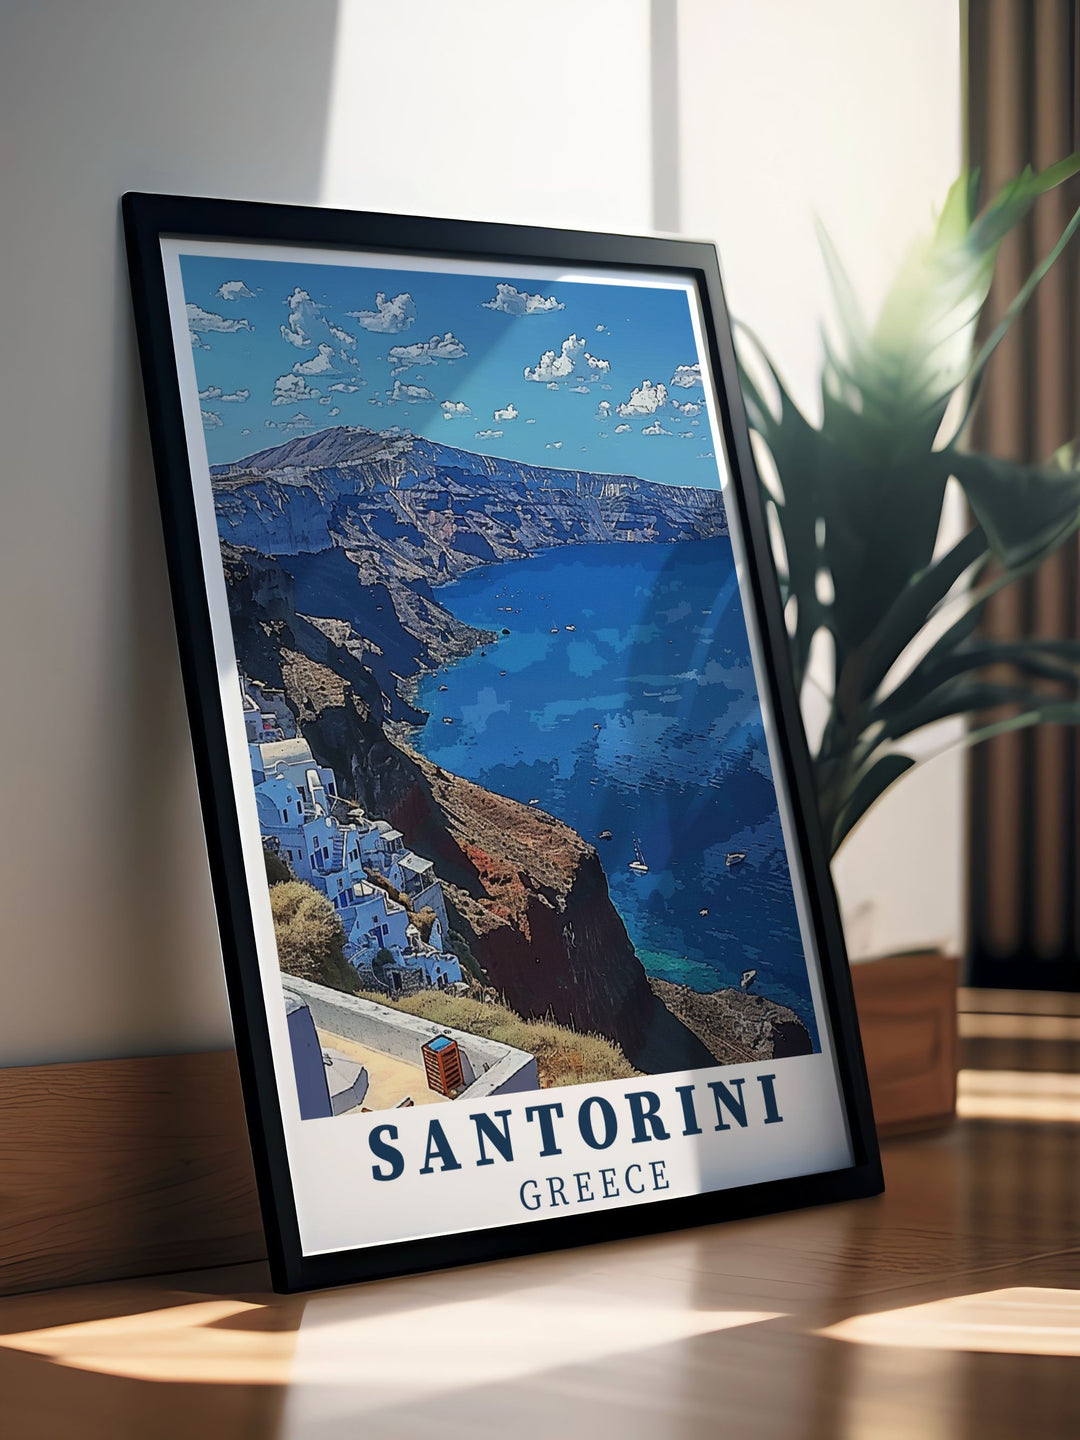 Captivating art print of Santorinis Caldera, showcasing the islands geological wonders and vibrant colors. Ideal for bringing a piece of the Mediterranean into your home.